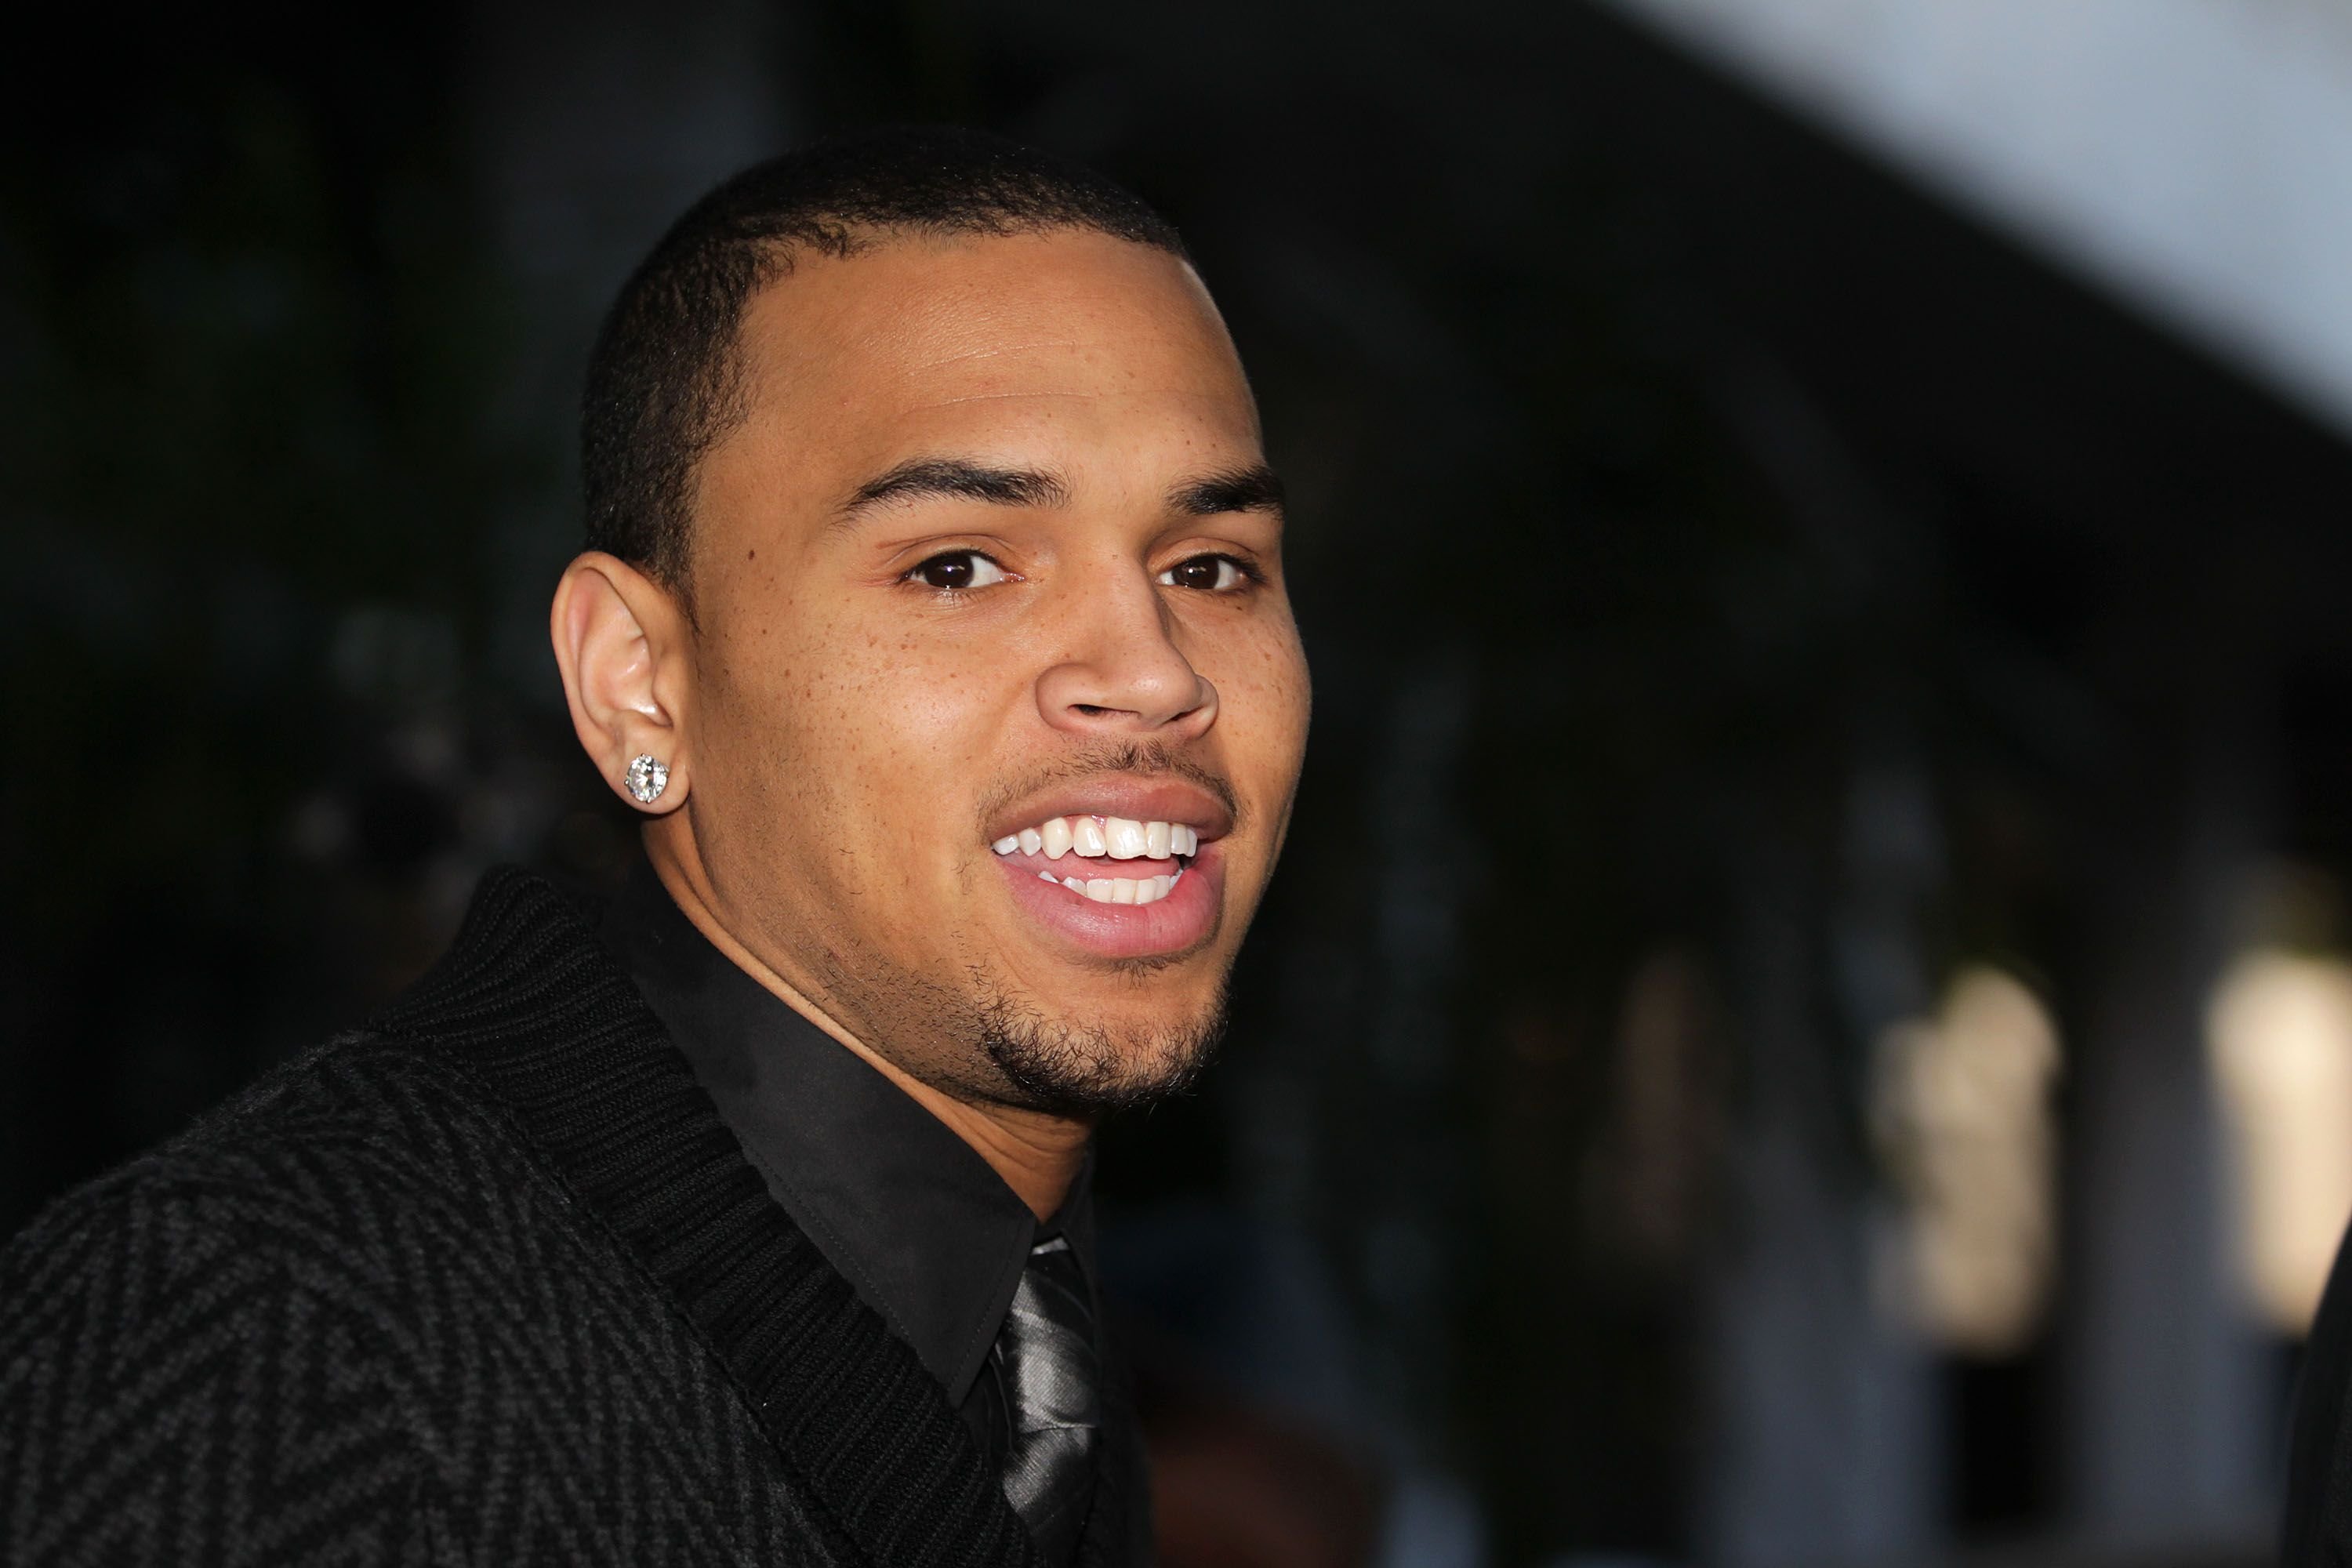 Chris Brown at the Los Angeles courthouse on January 28, 2011 in Los Angeles, California. | Source: Getty Images